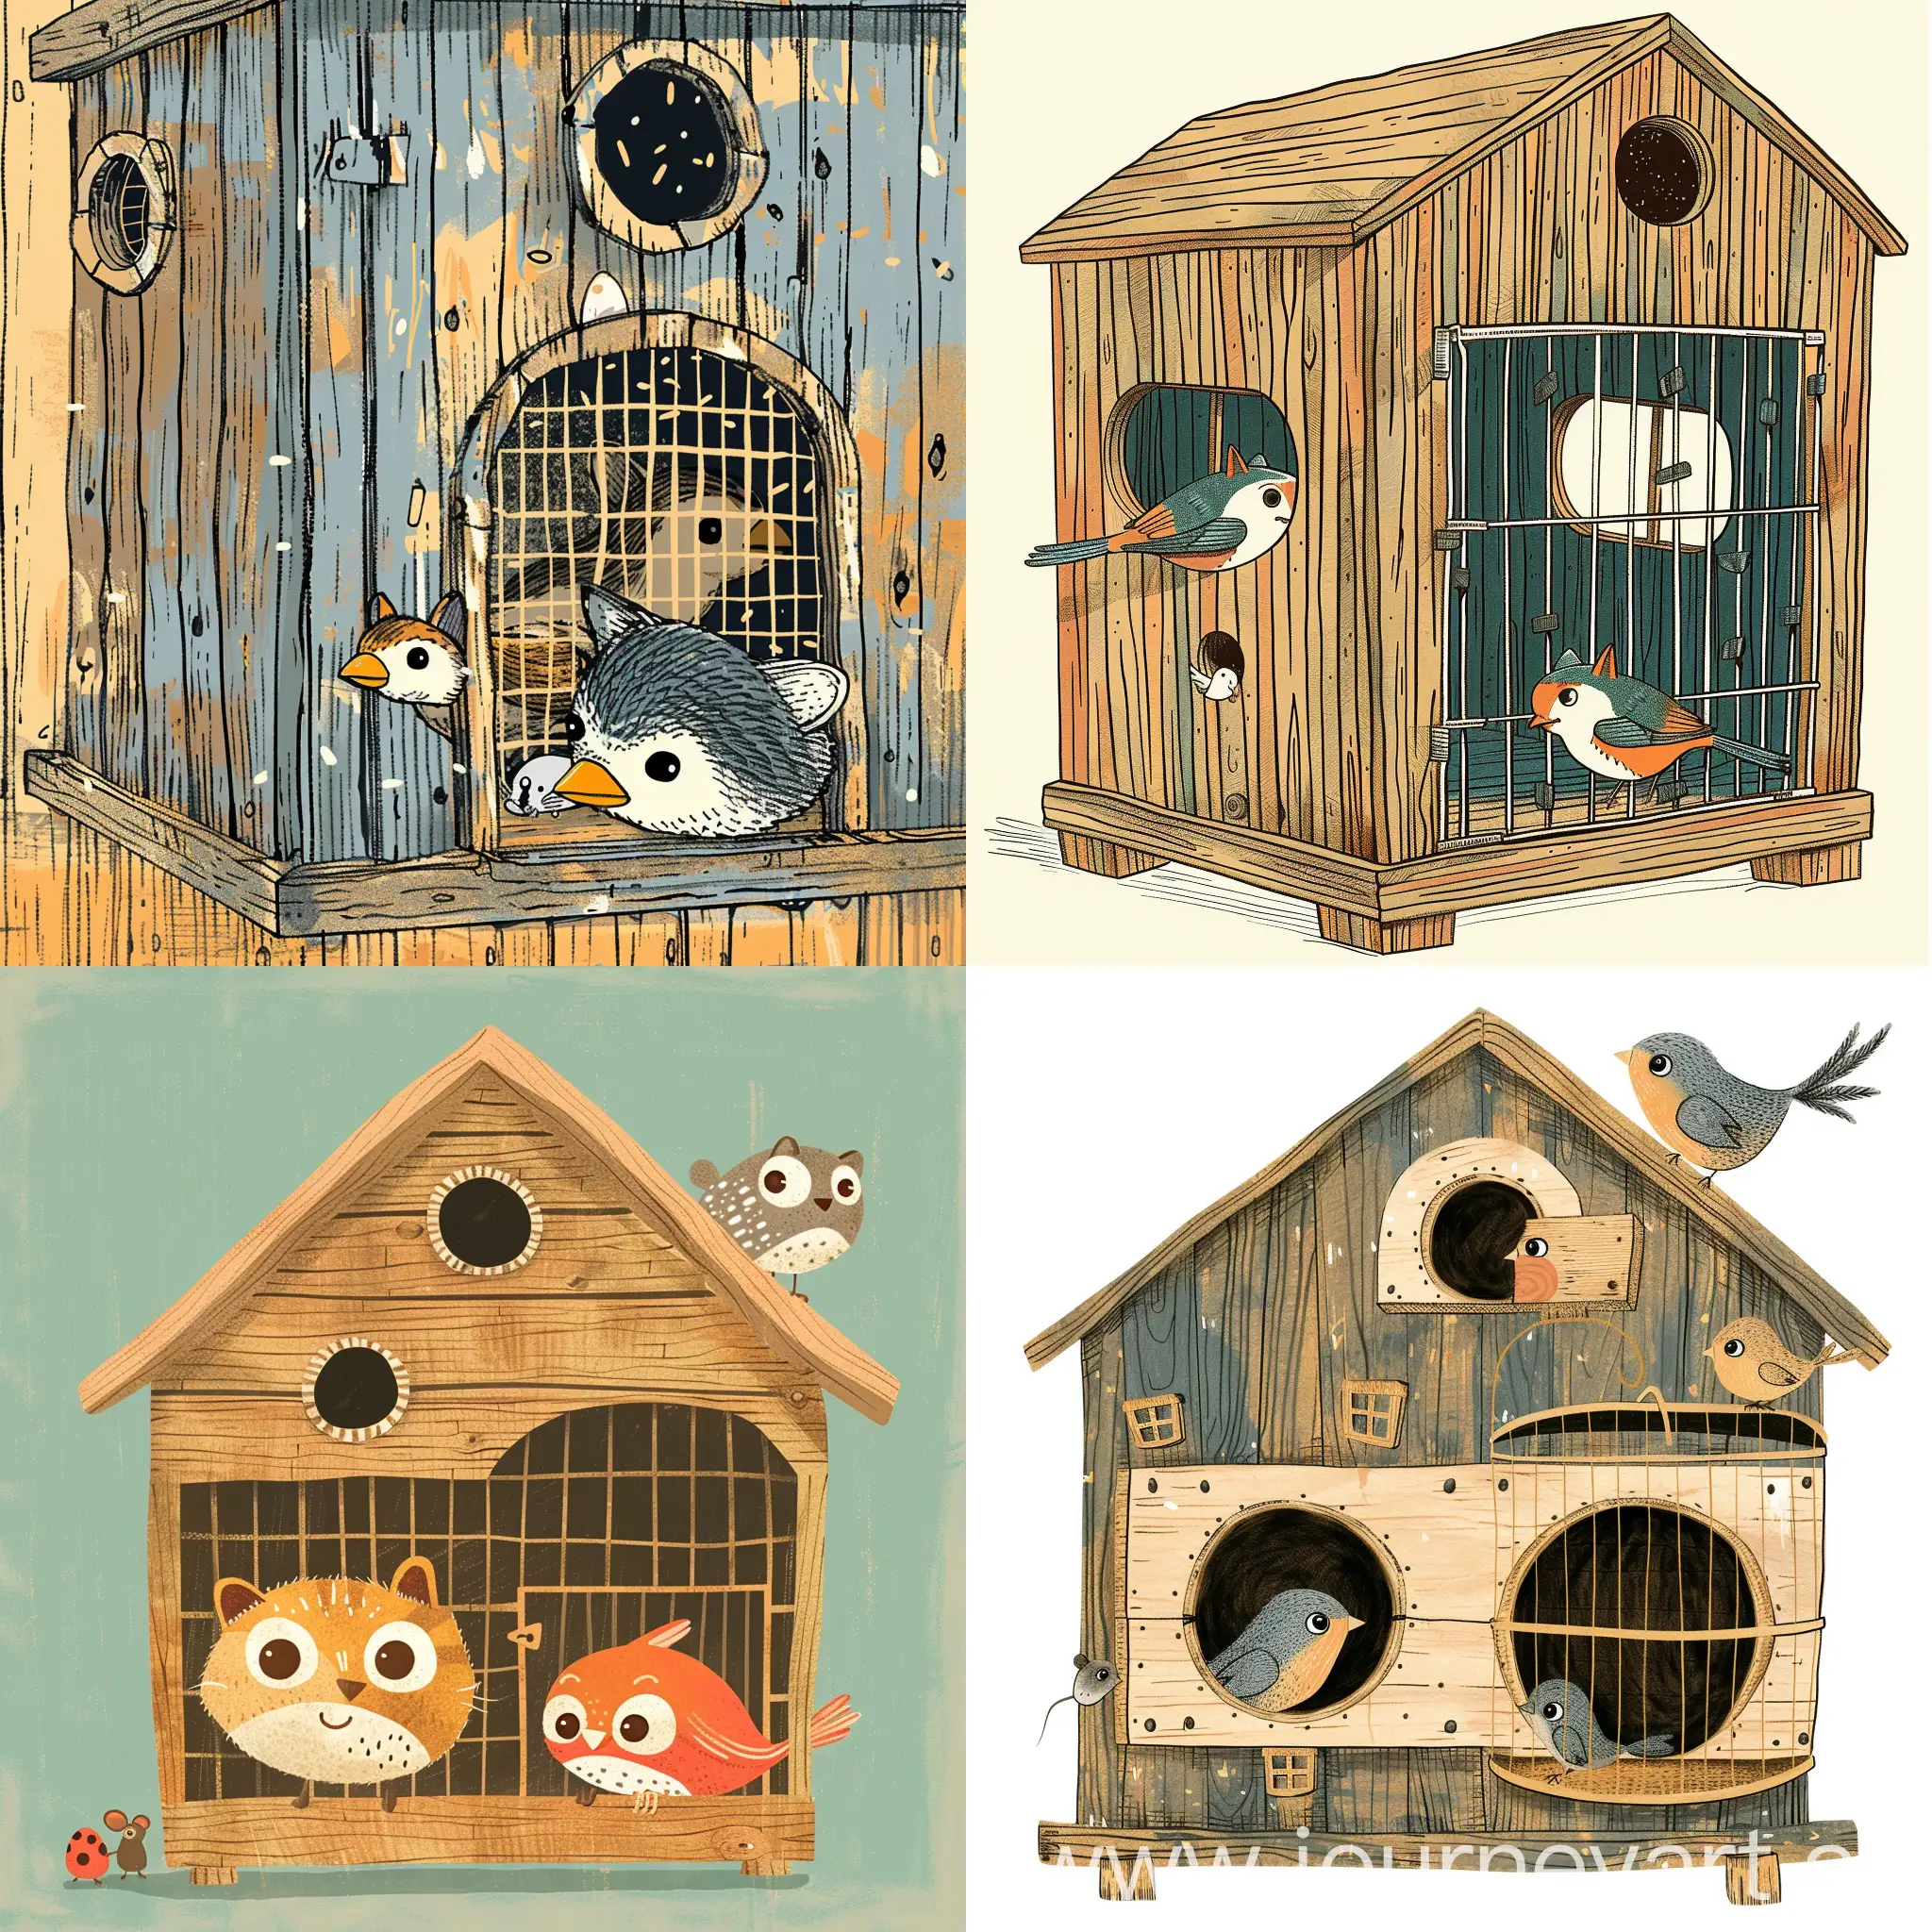 Whimsical-Birdhouse-with-Peekaboo-Birds-Mouse-and-Curious-Cat